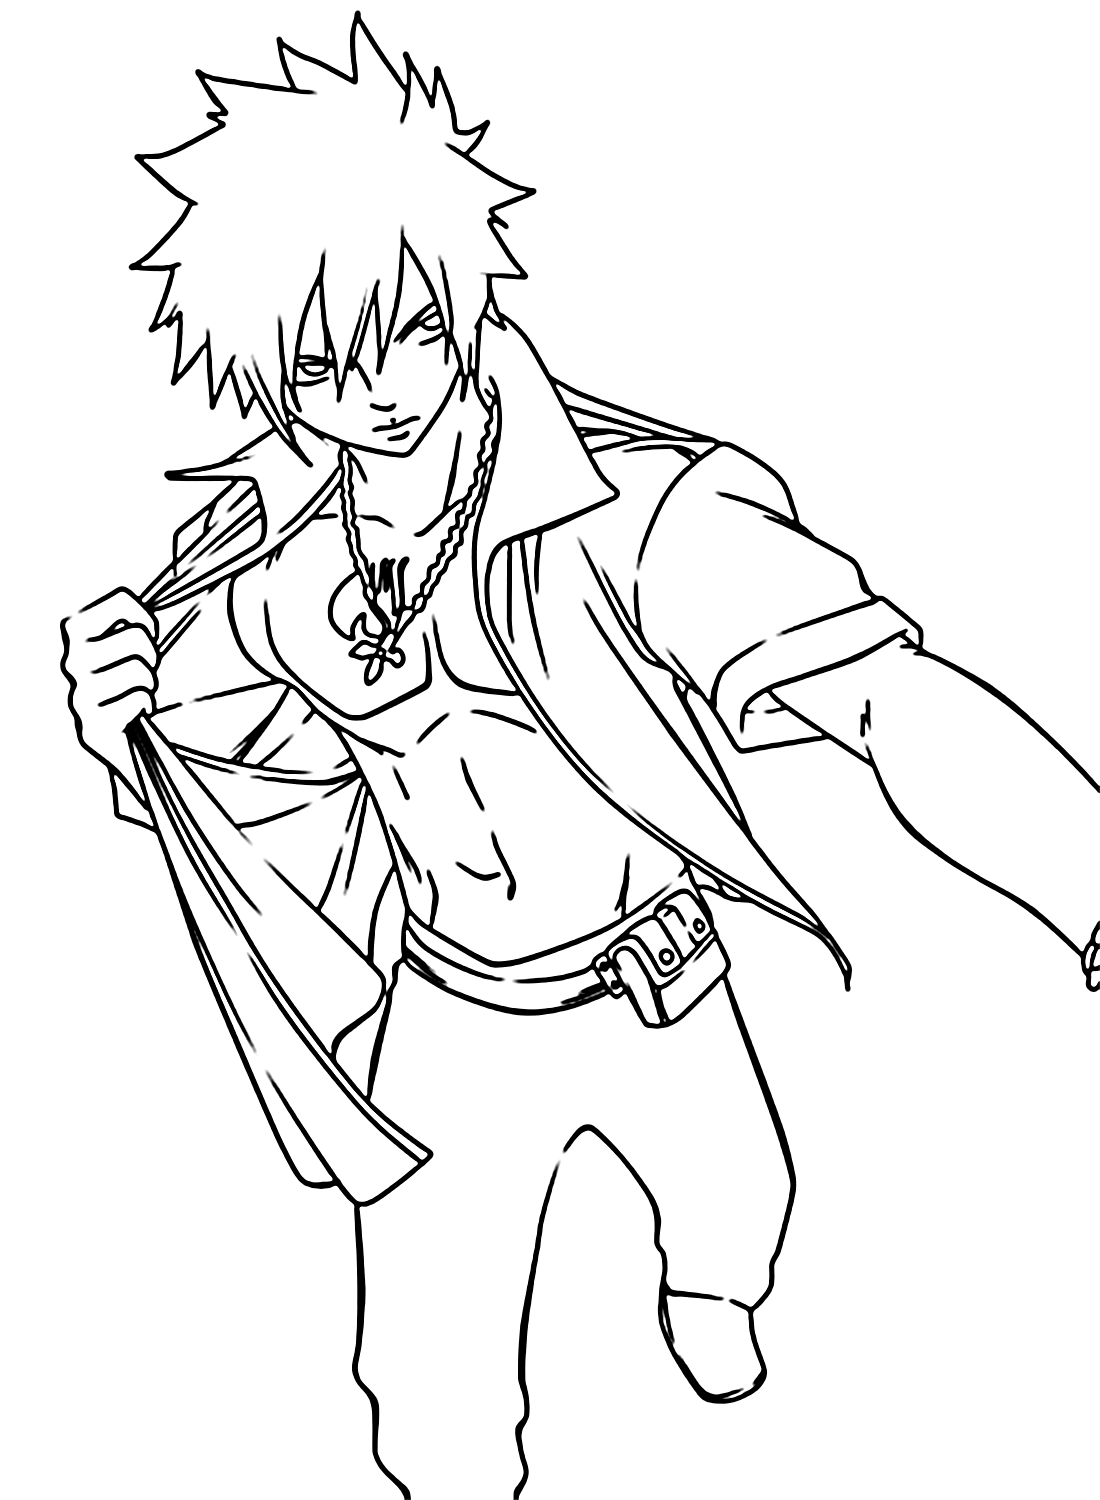 Free Gray Fullbuster Coloring Pages from Gray Fullbuster